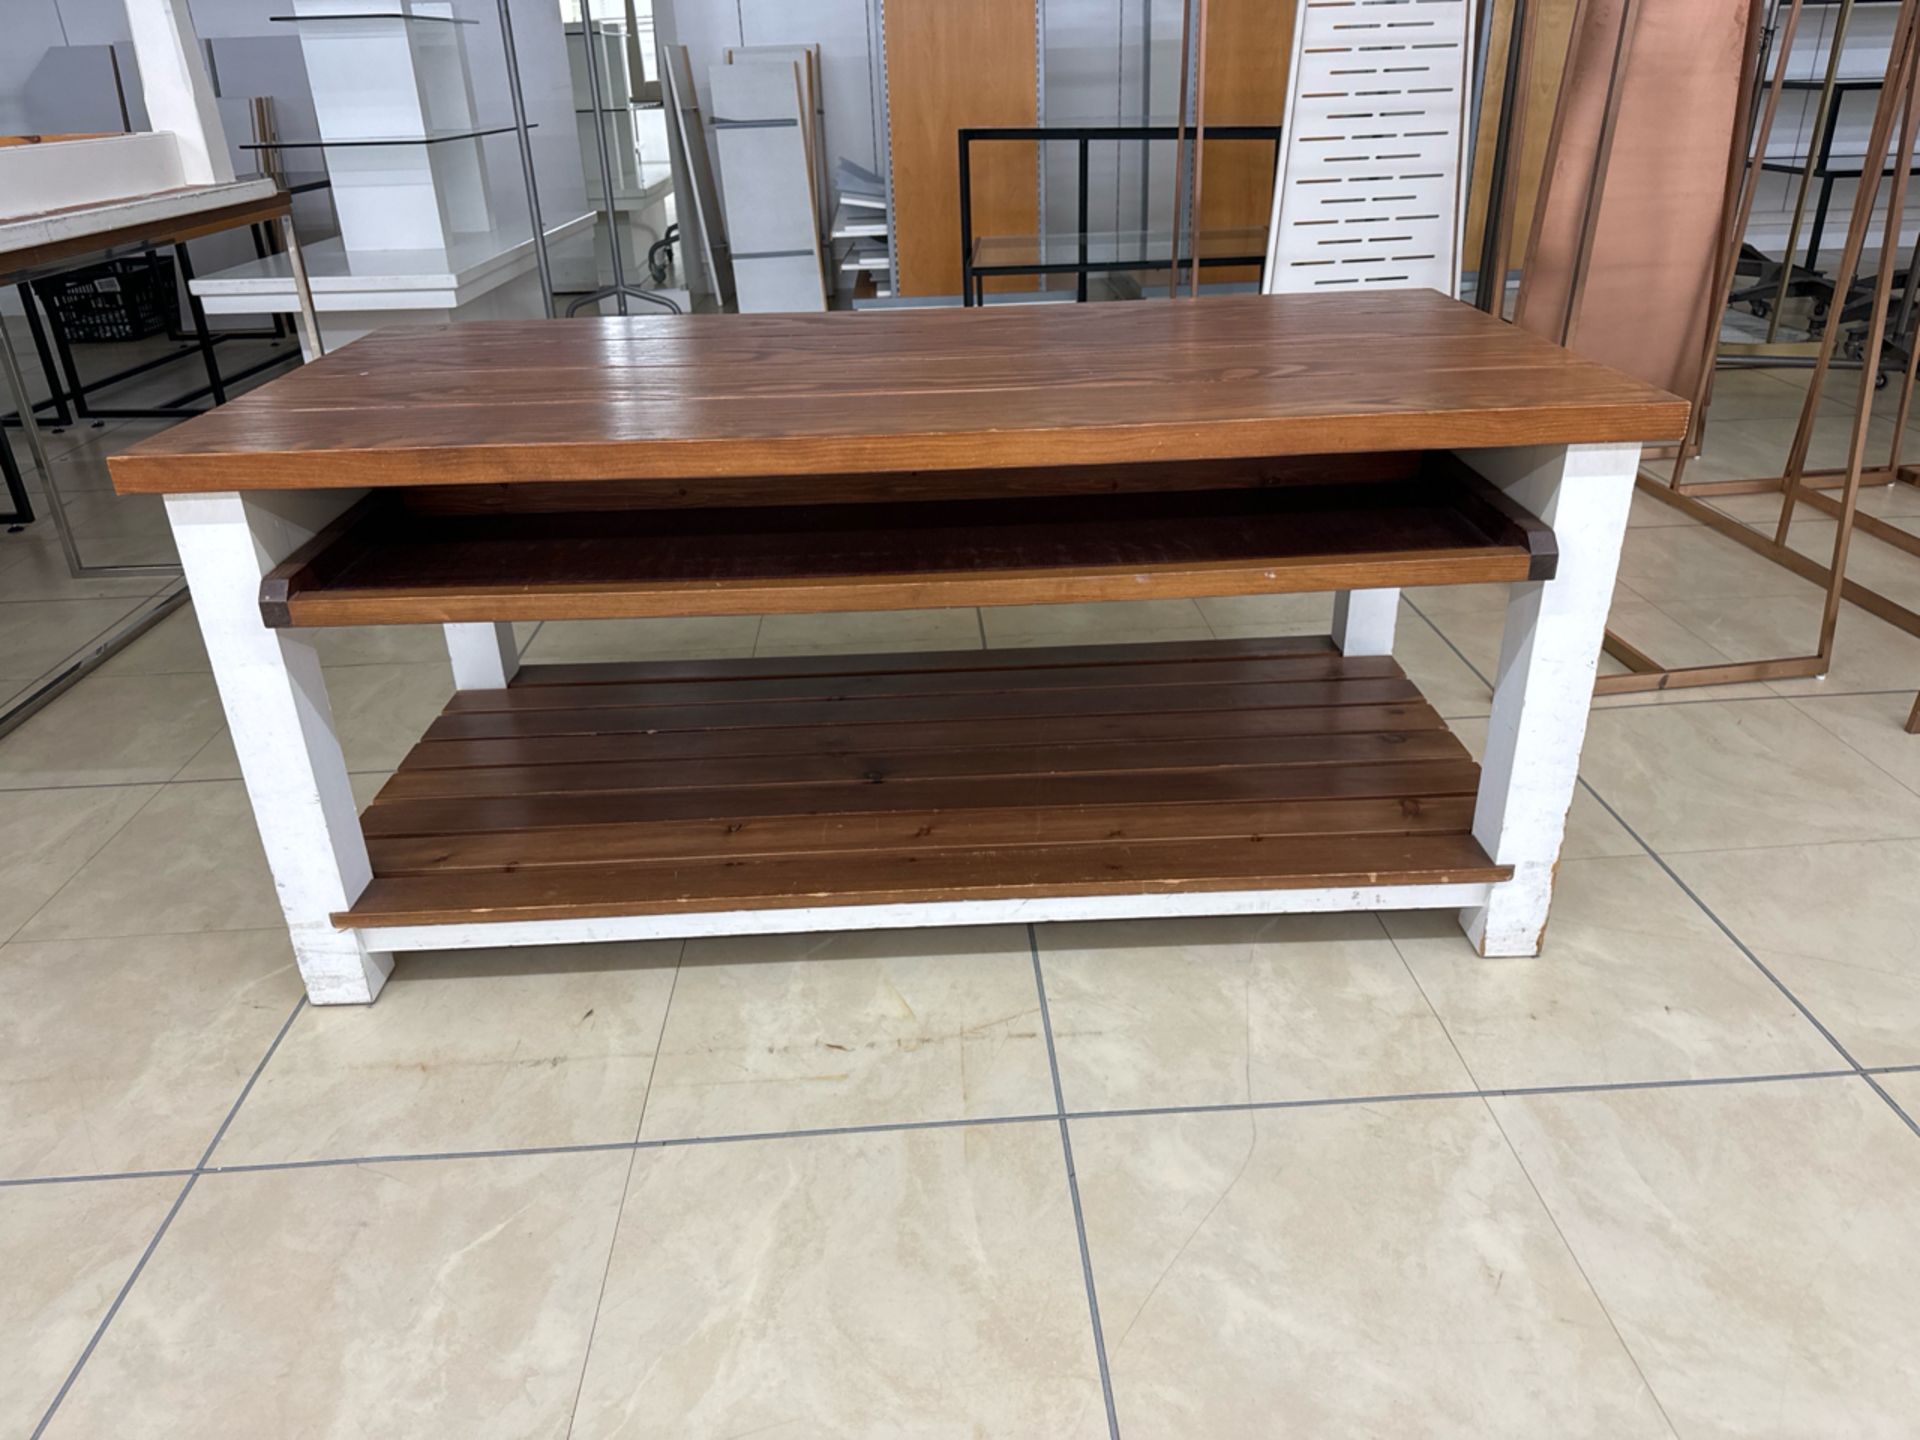 Wooden Slatted Table with Drawer